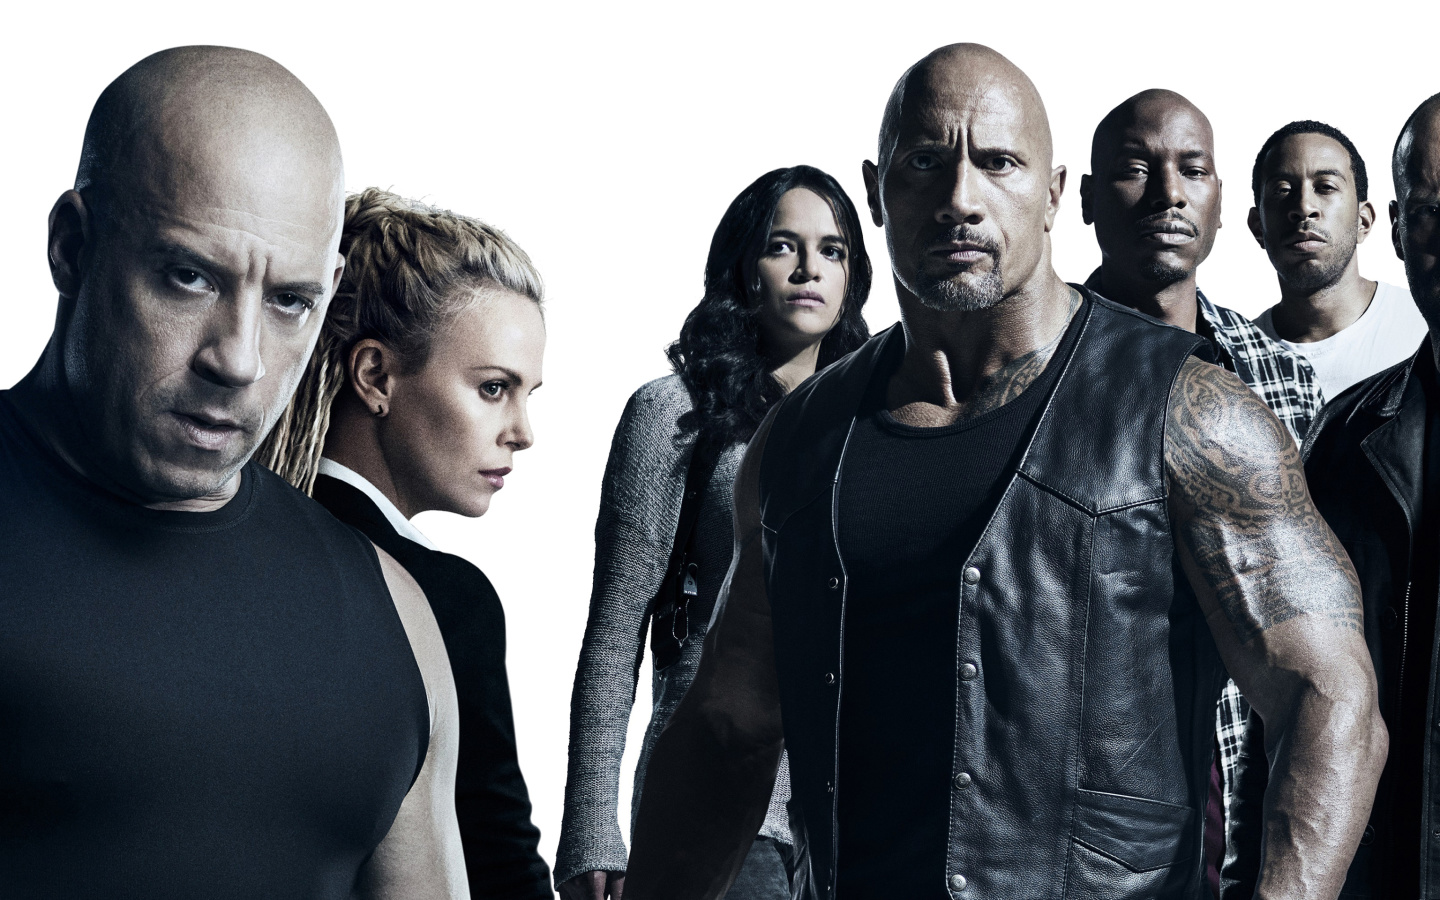 The Fate of the Furious Cast wallpaper 1440x900